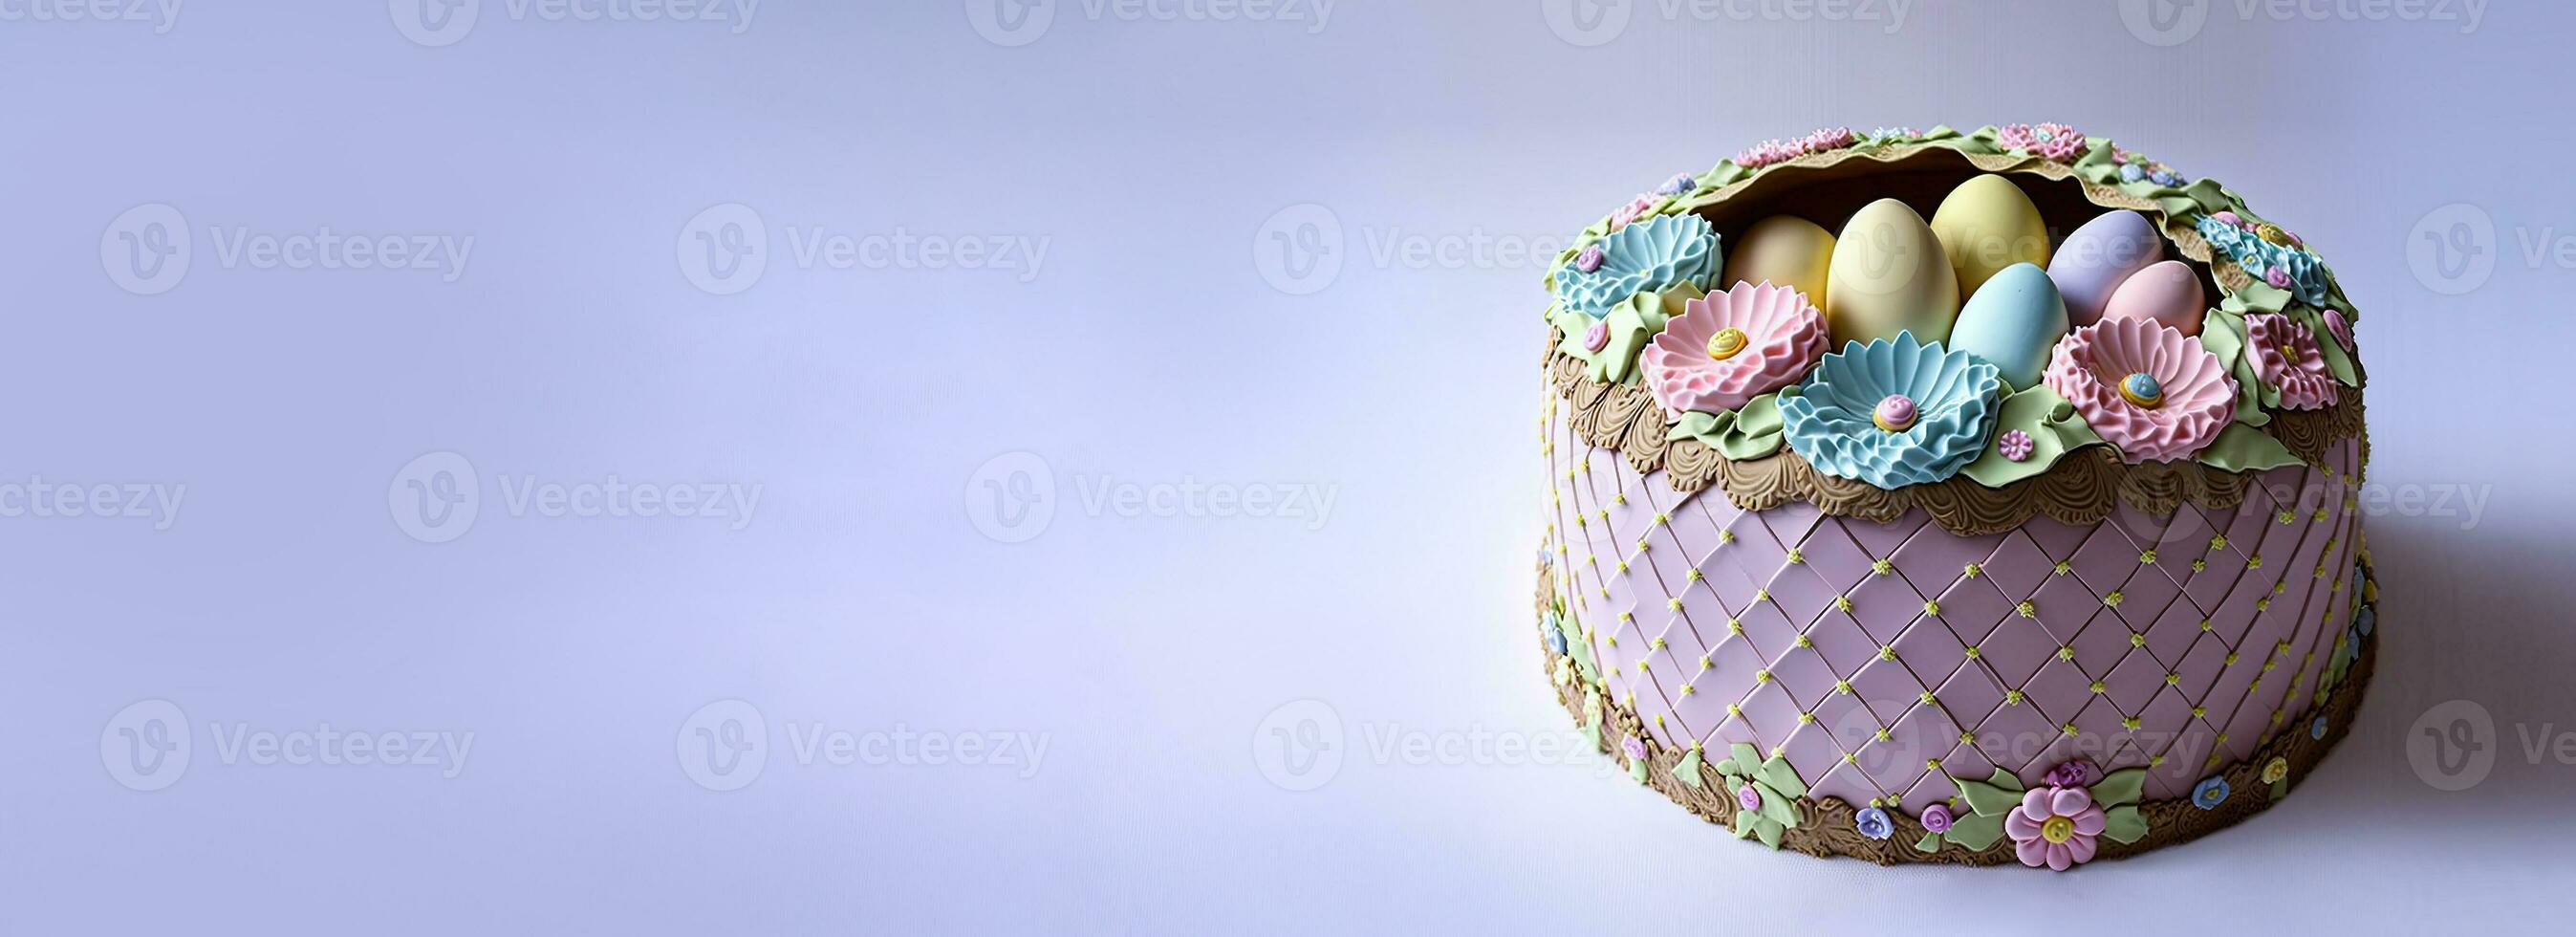 3D Render of Pastel Color Egg And Flowers Decorative Cake Against Purple Background And Copy Space. Happy Easter Concept. photo